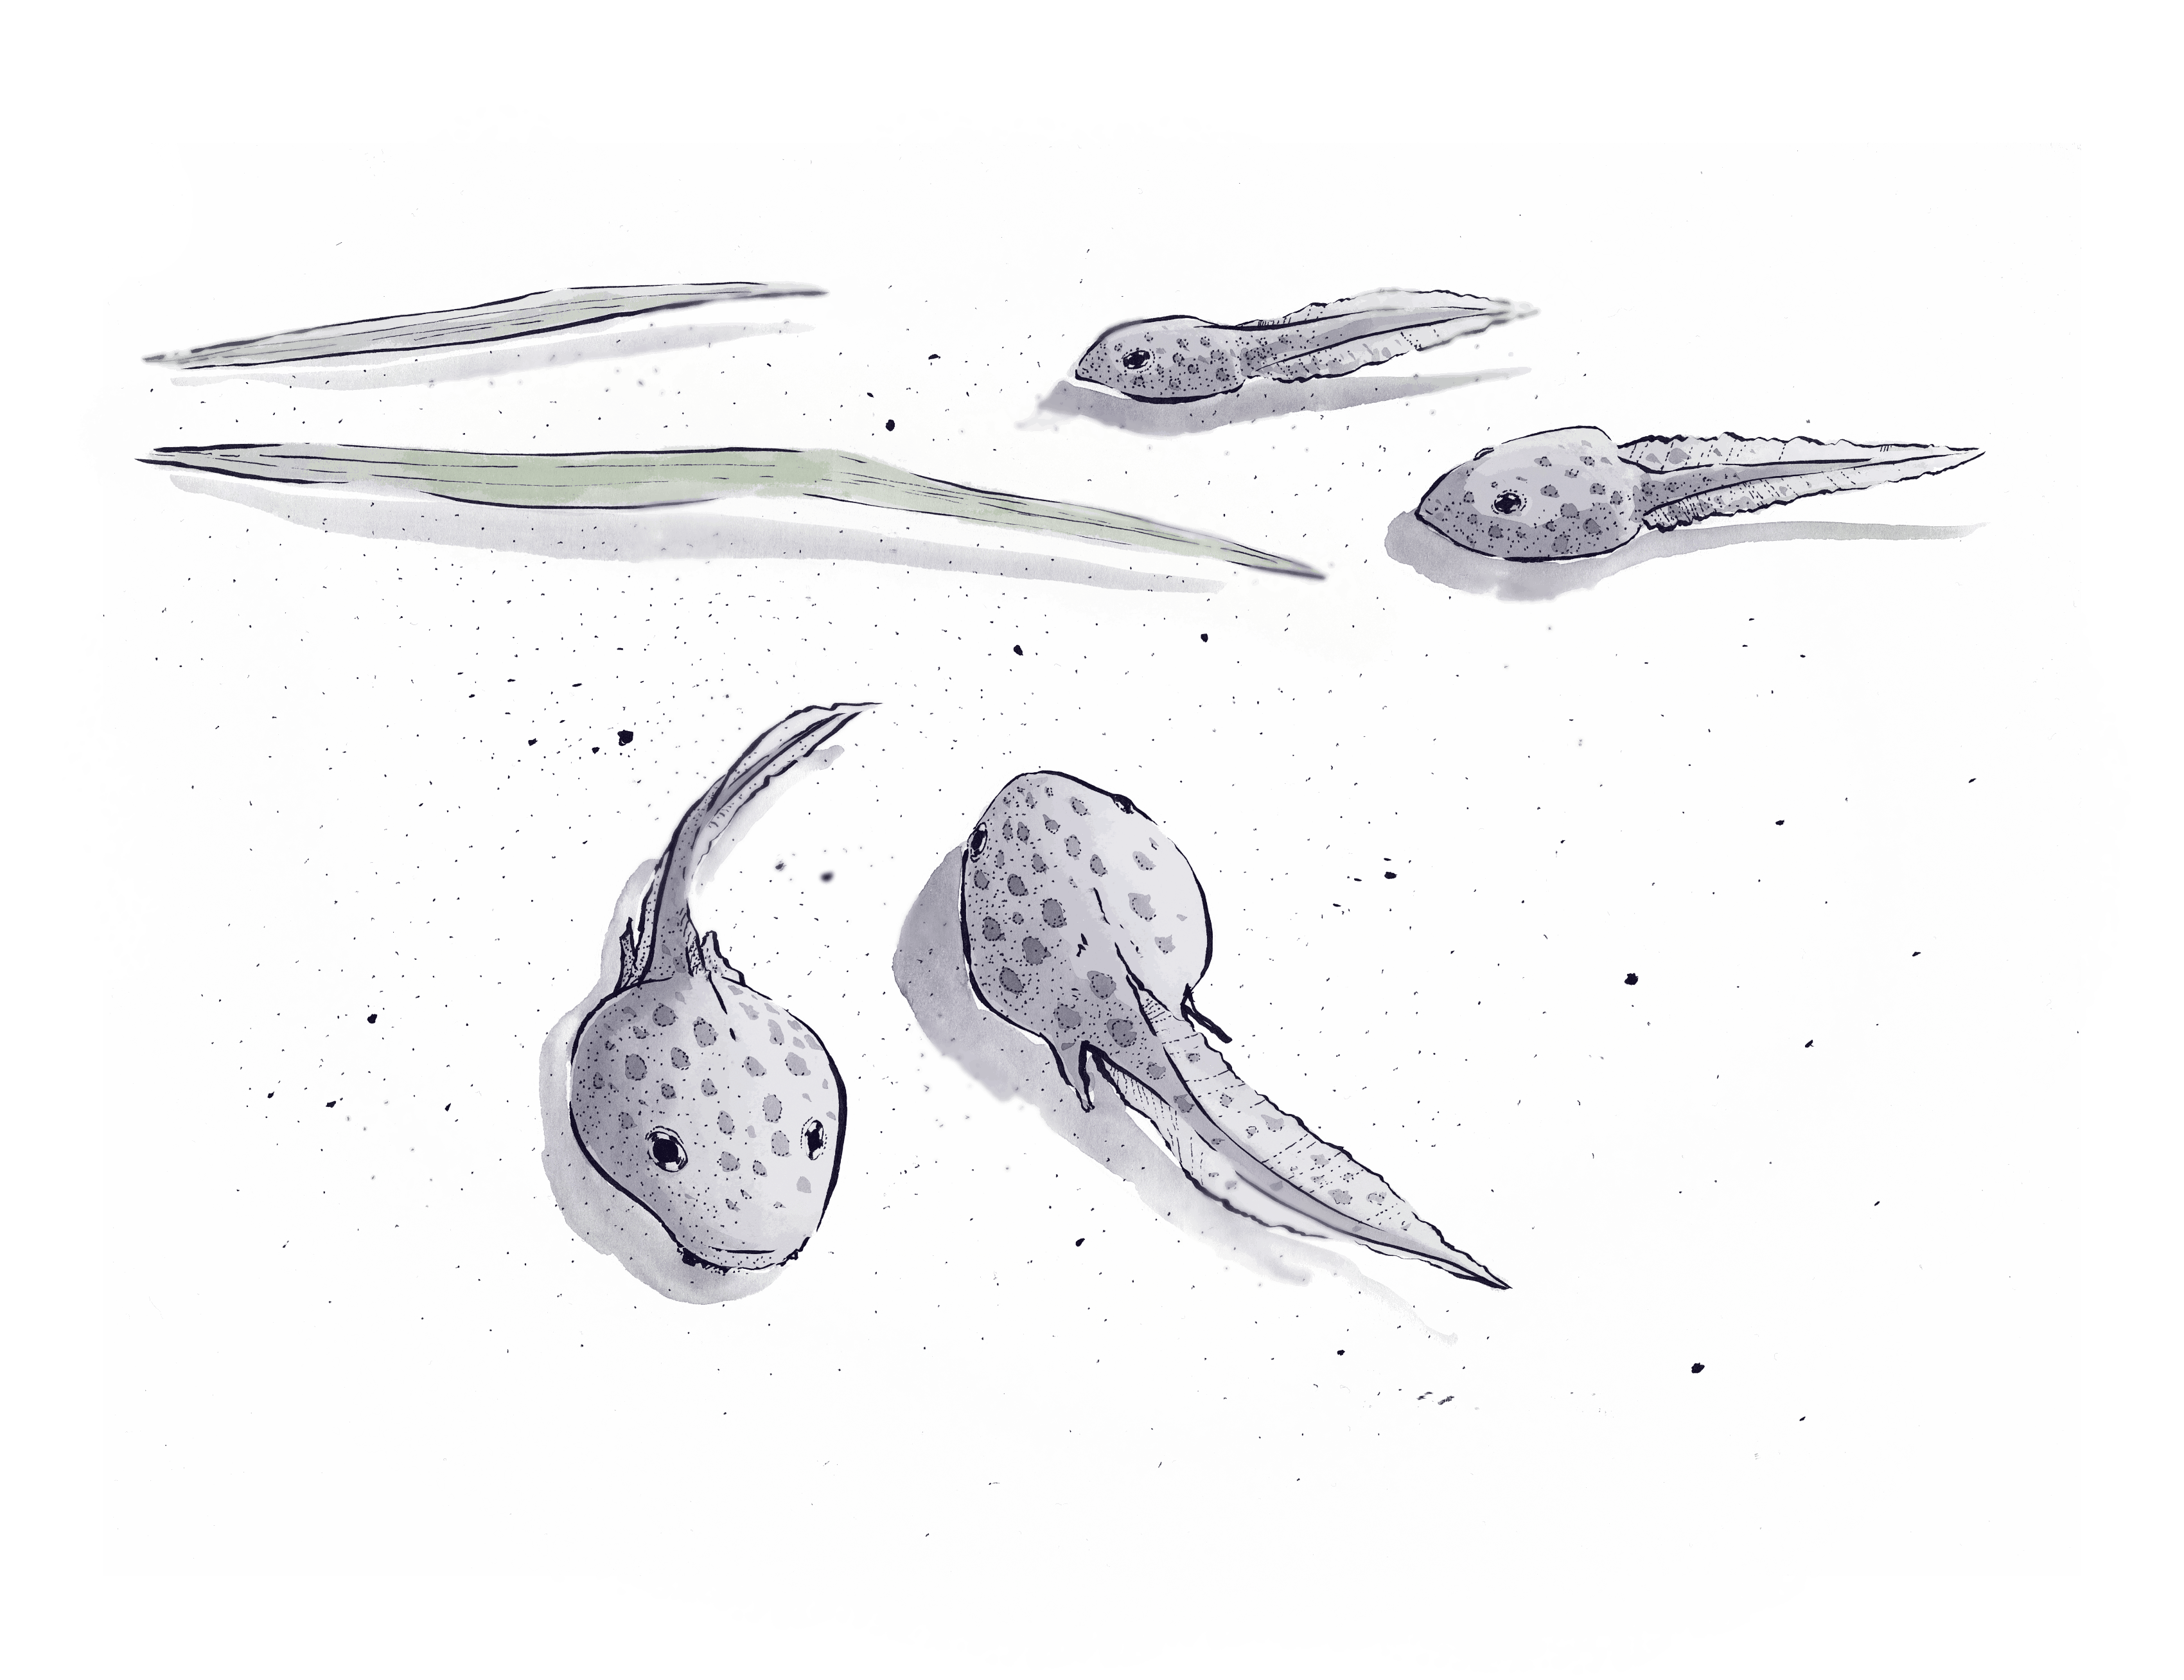 Ink wash drawing of tadpoles